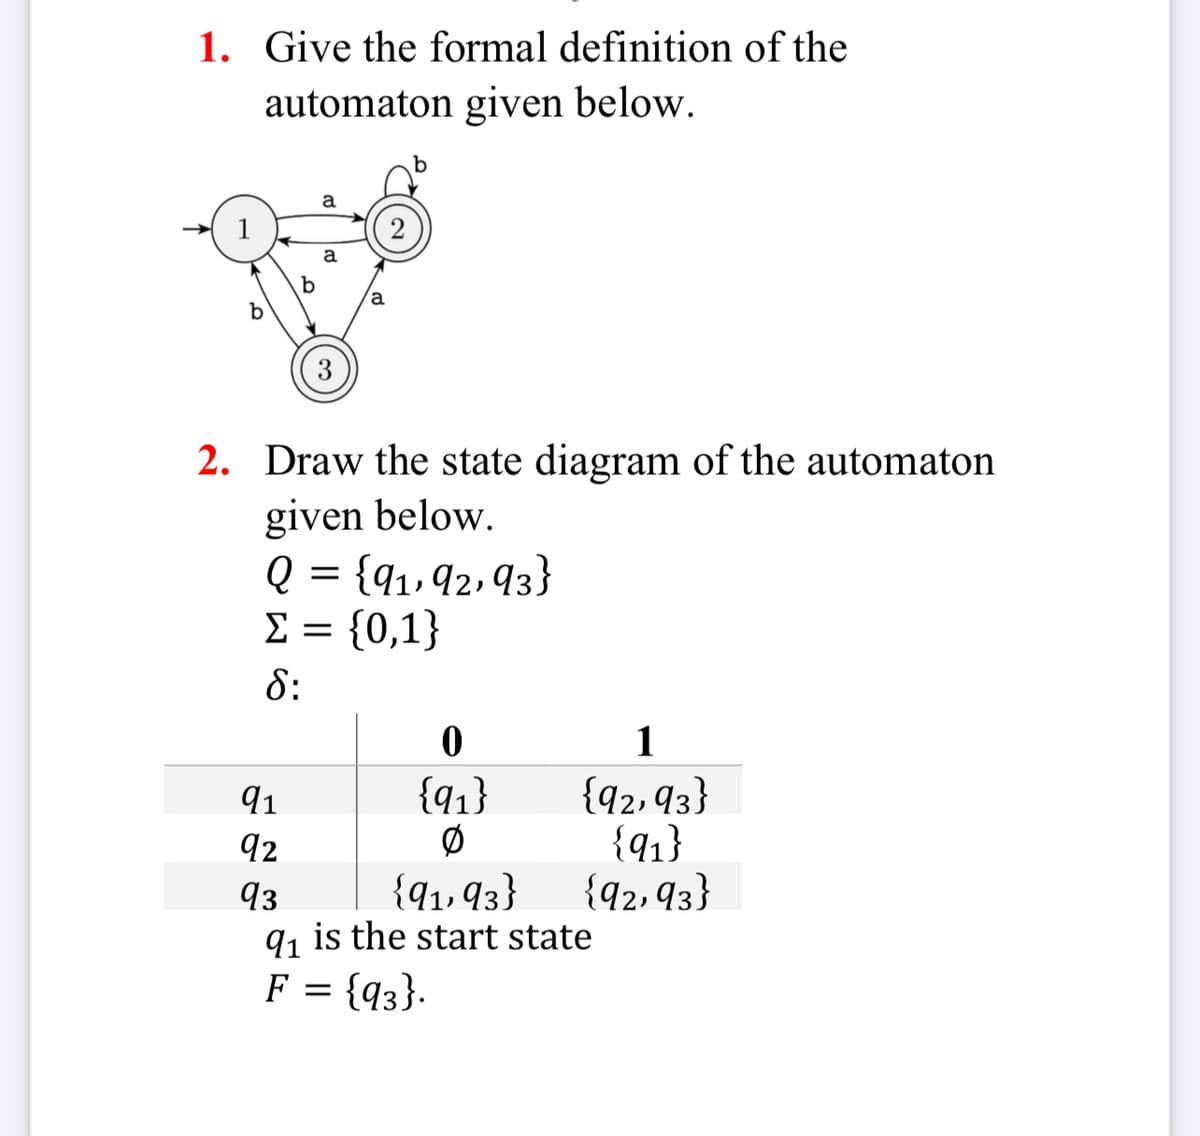 1. Give the formal definition of the
automaton given below.
1
a
a
a
b
3
2
2. Draw the state diagram of the automaton
given below.
Q = {91, 92, 93}
Σ = {0,1}
δ:
0
1
91
{91}
{92, 93}
92
0
{91}
93
{91,93}
{92,93}
91 is the start state
F =
{93}.